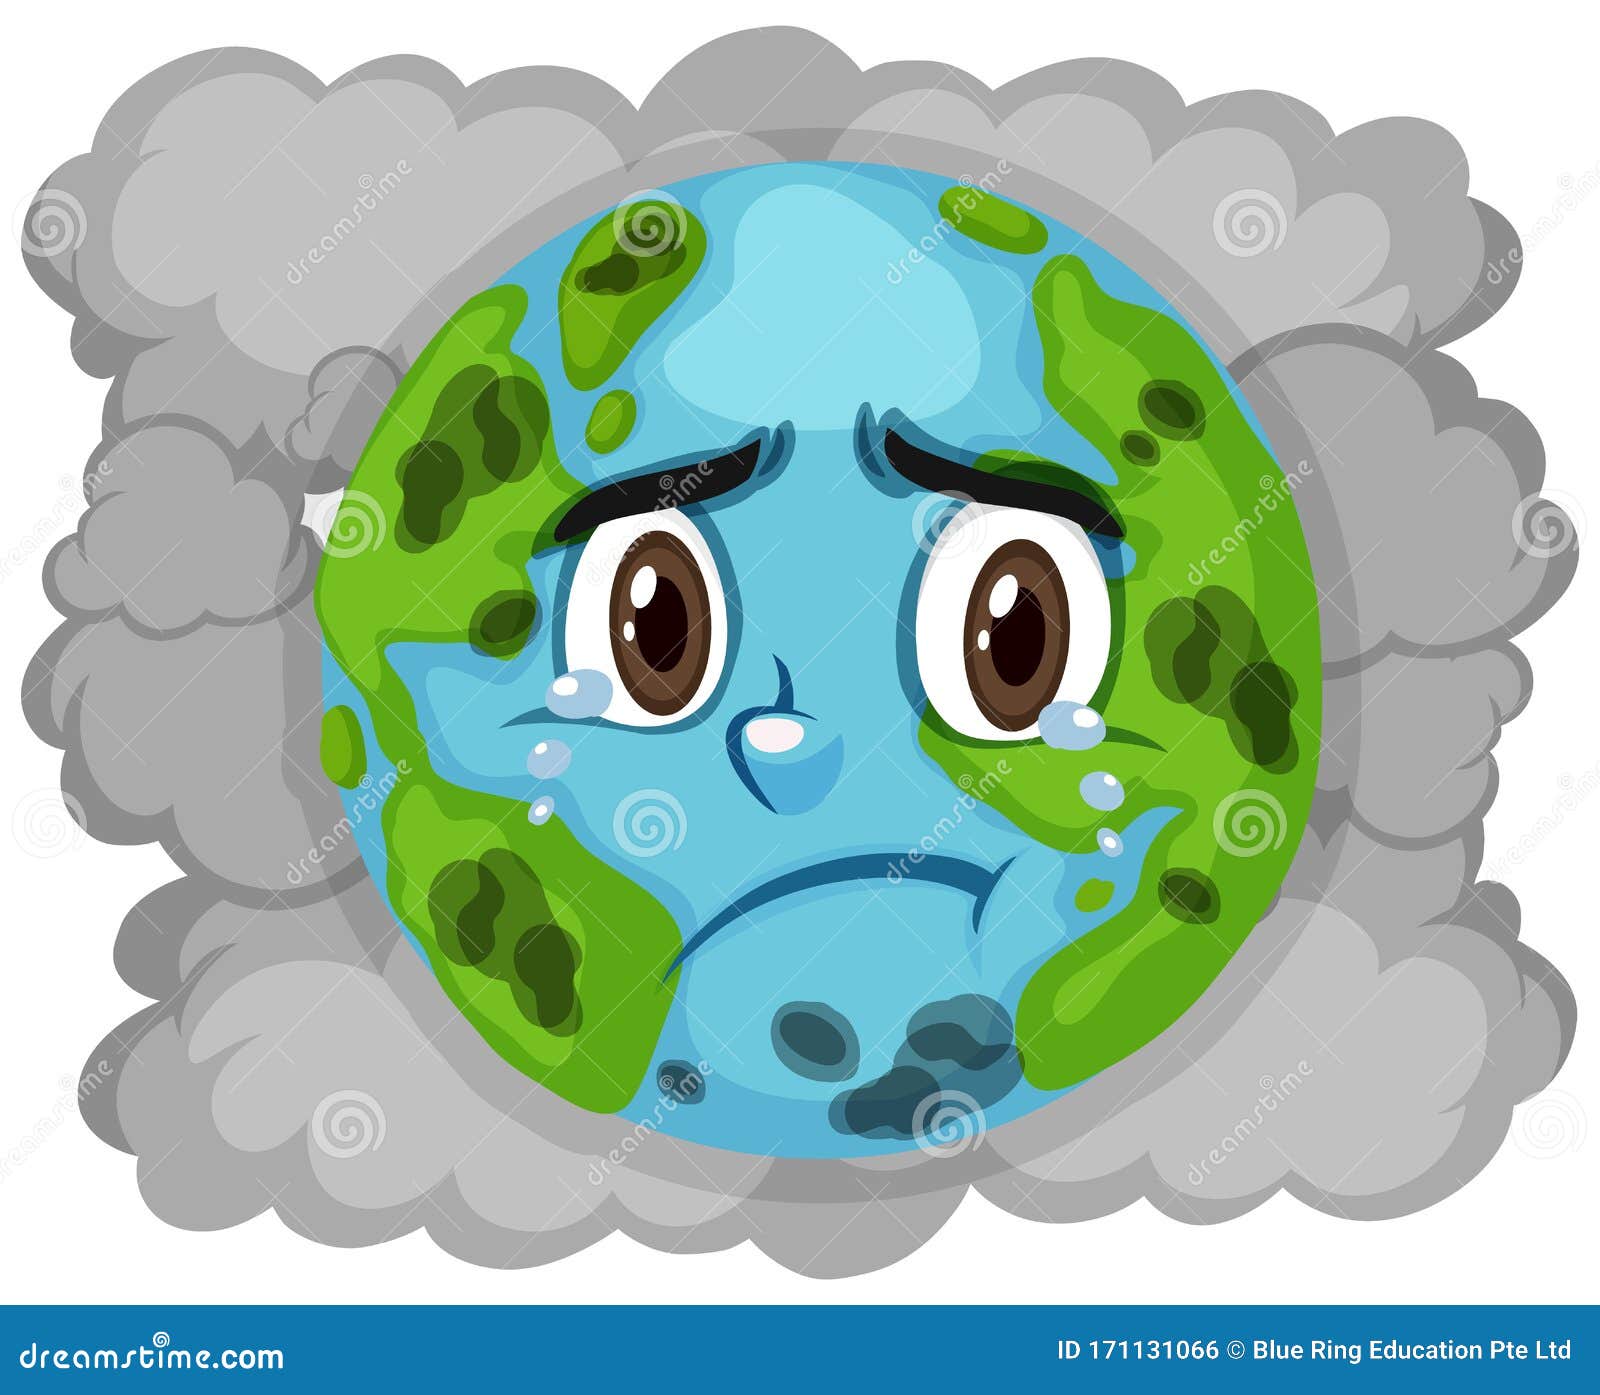 Crying Earth Pollution Stock Illustrations – 83 Crying Earth Pollution  Stock Illustrations, Vectors & Clipart - Dreamstime